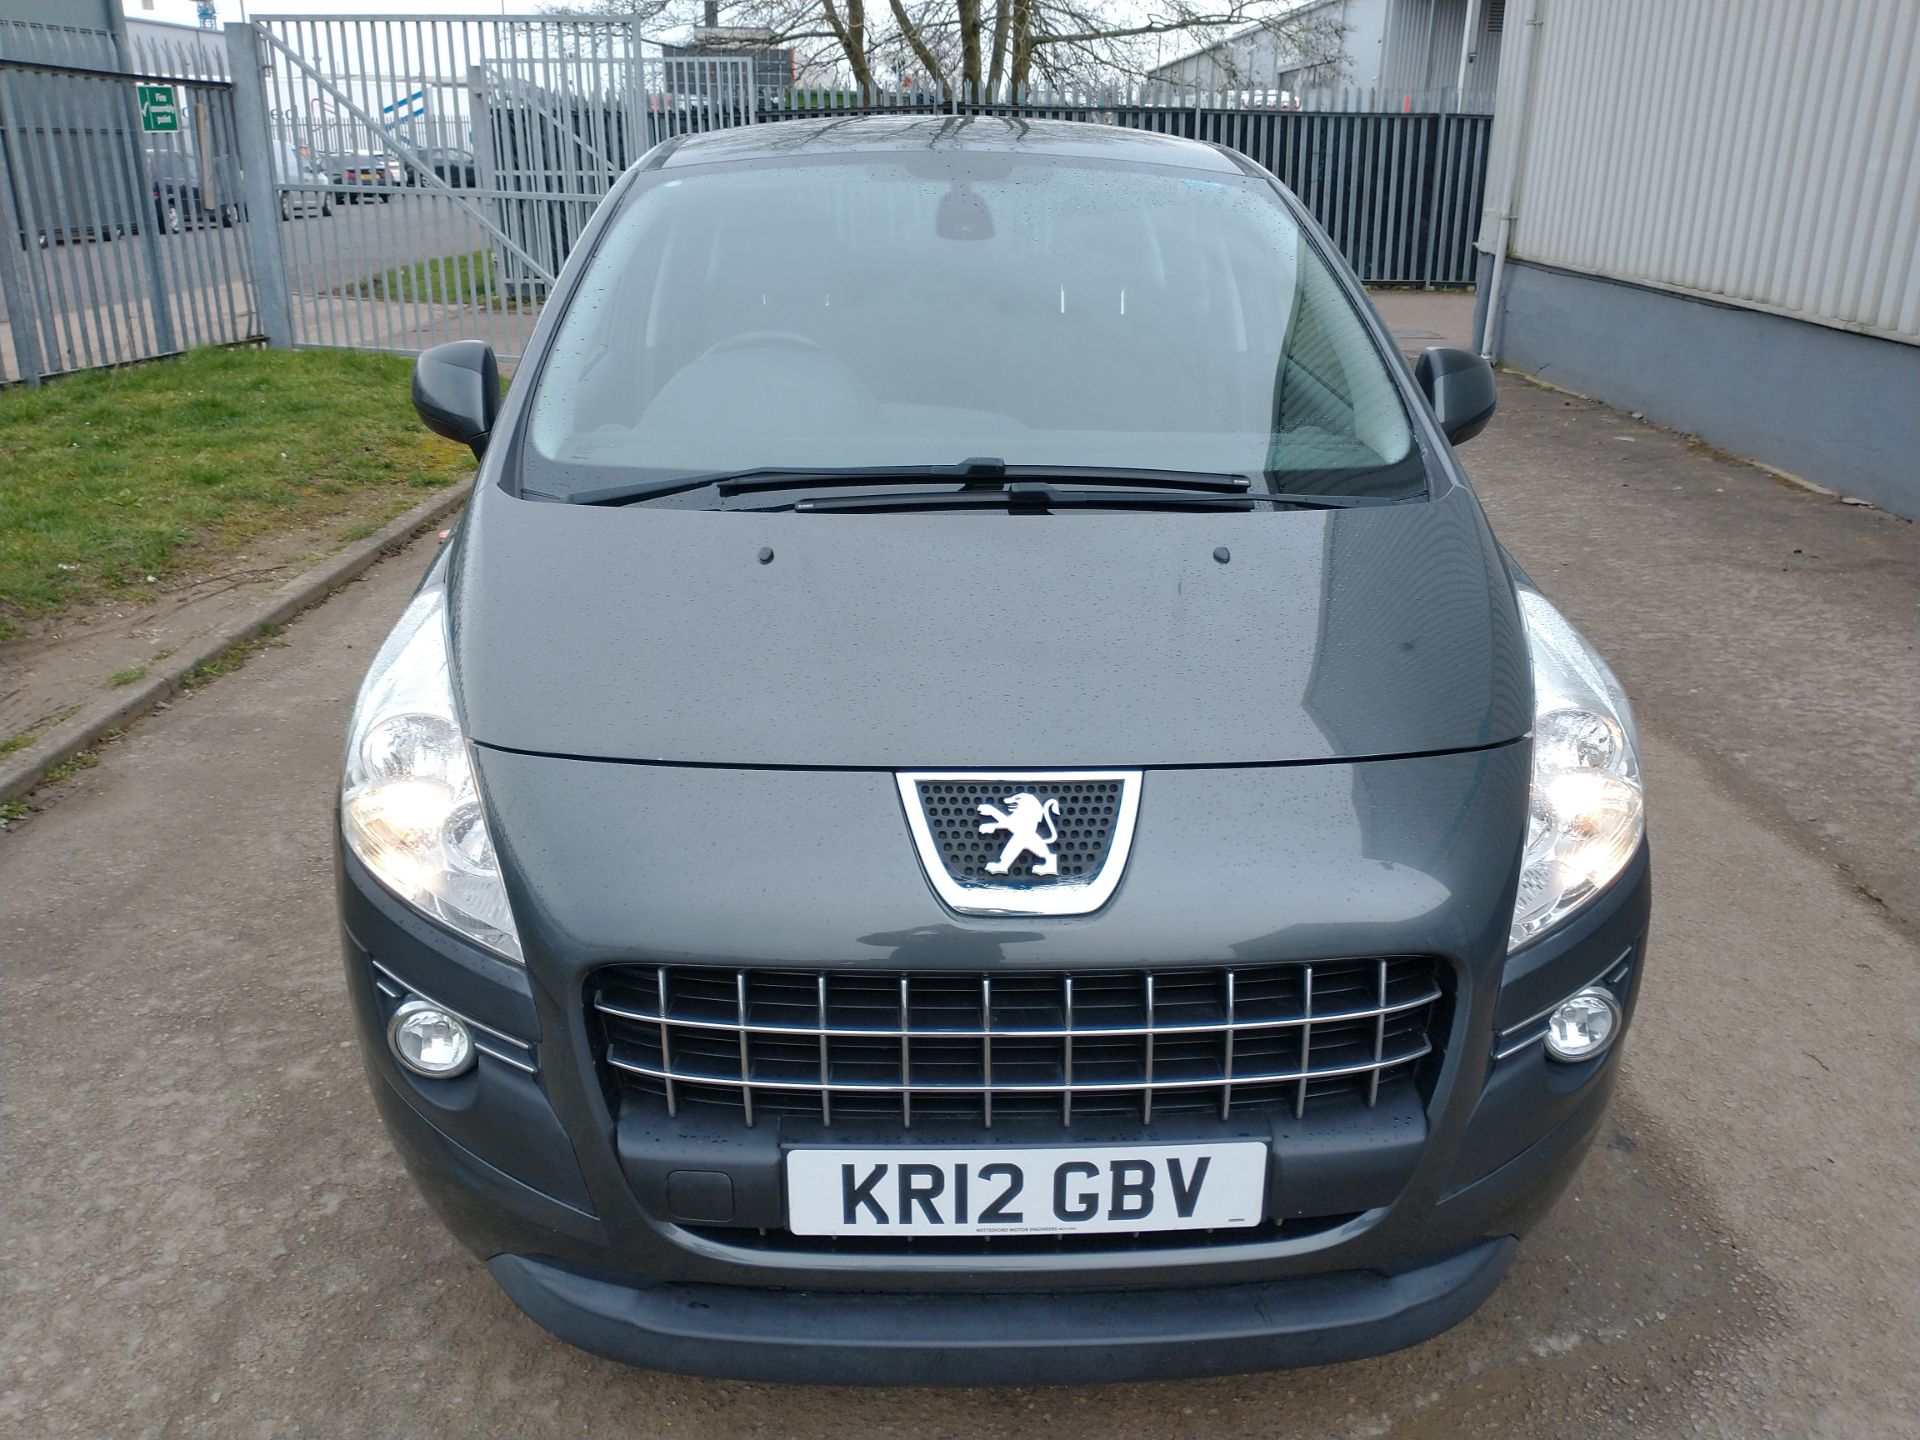 2012 Peugeot 3008 Active HDI 1.6 5DR SUV - CL505 - NO VAT ON THE HAMM - Image 18 of 19